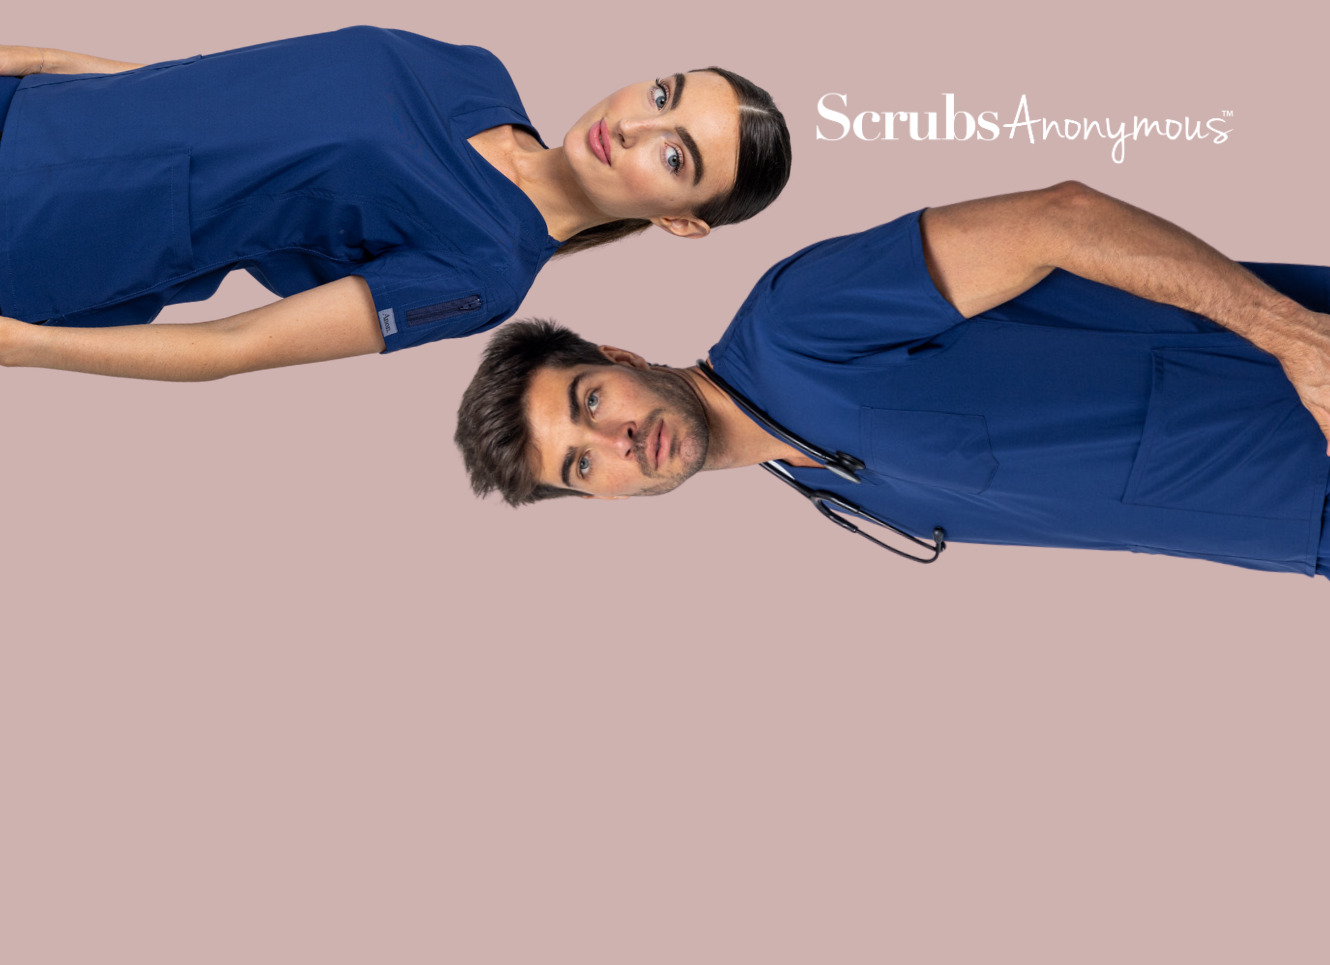 FASHIONABLE SCRUBS AT IT'S FINEST Anonymous Scrubs